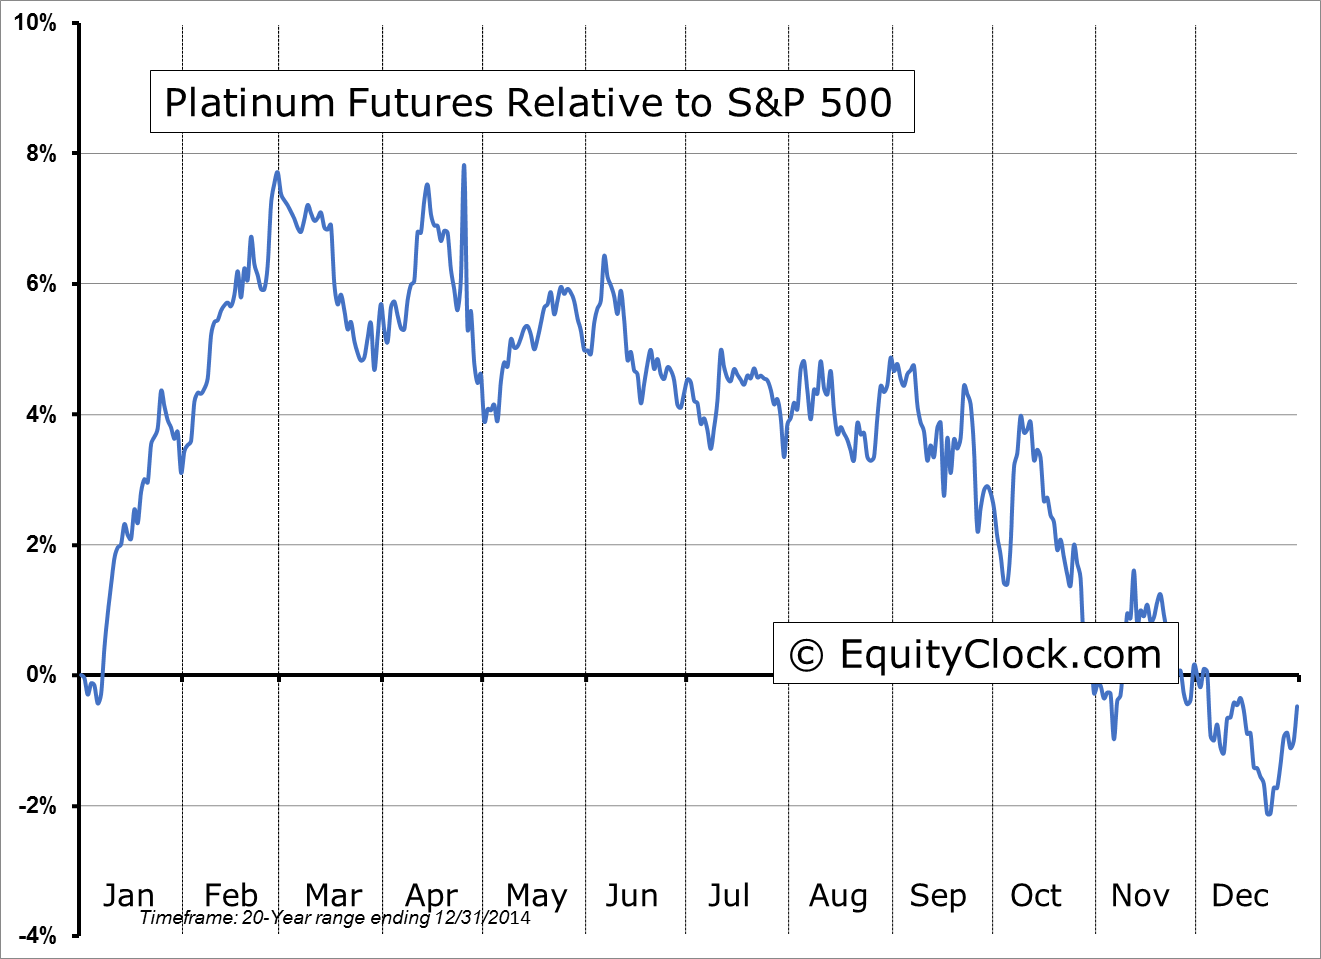 FUTURE_PL1 Relative to the S&P 500